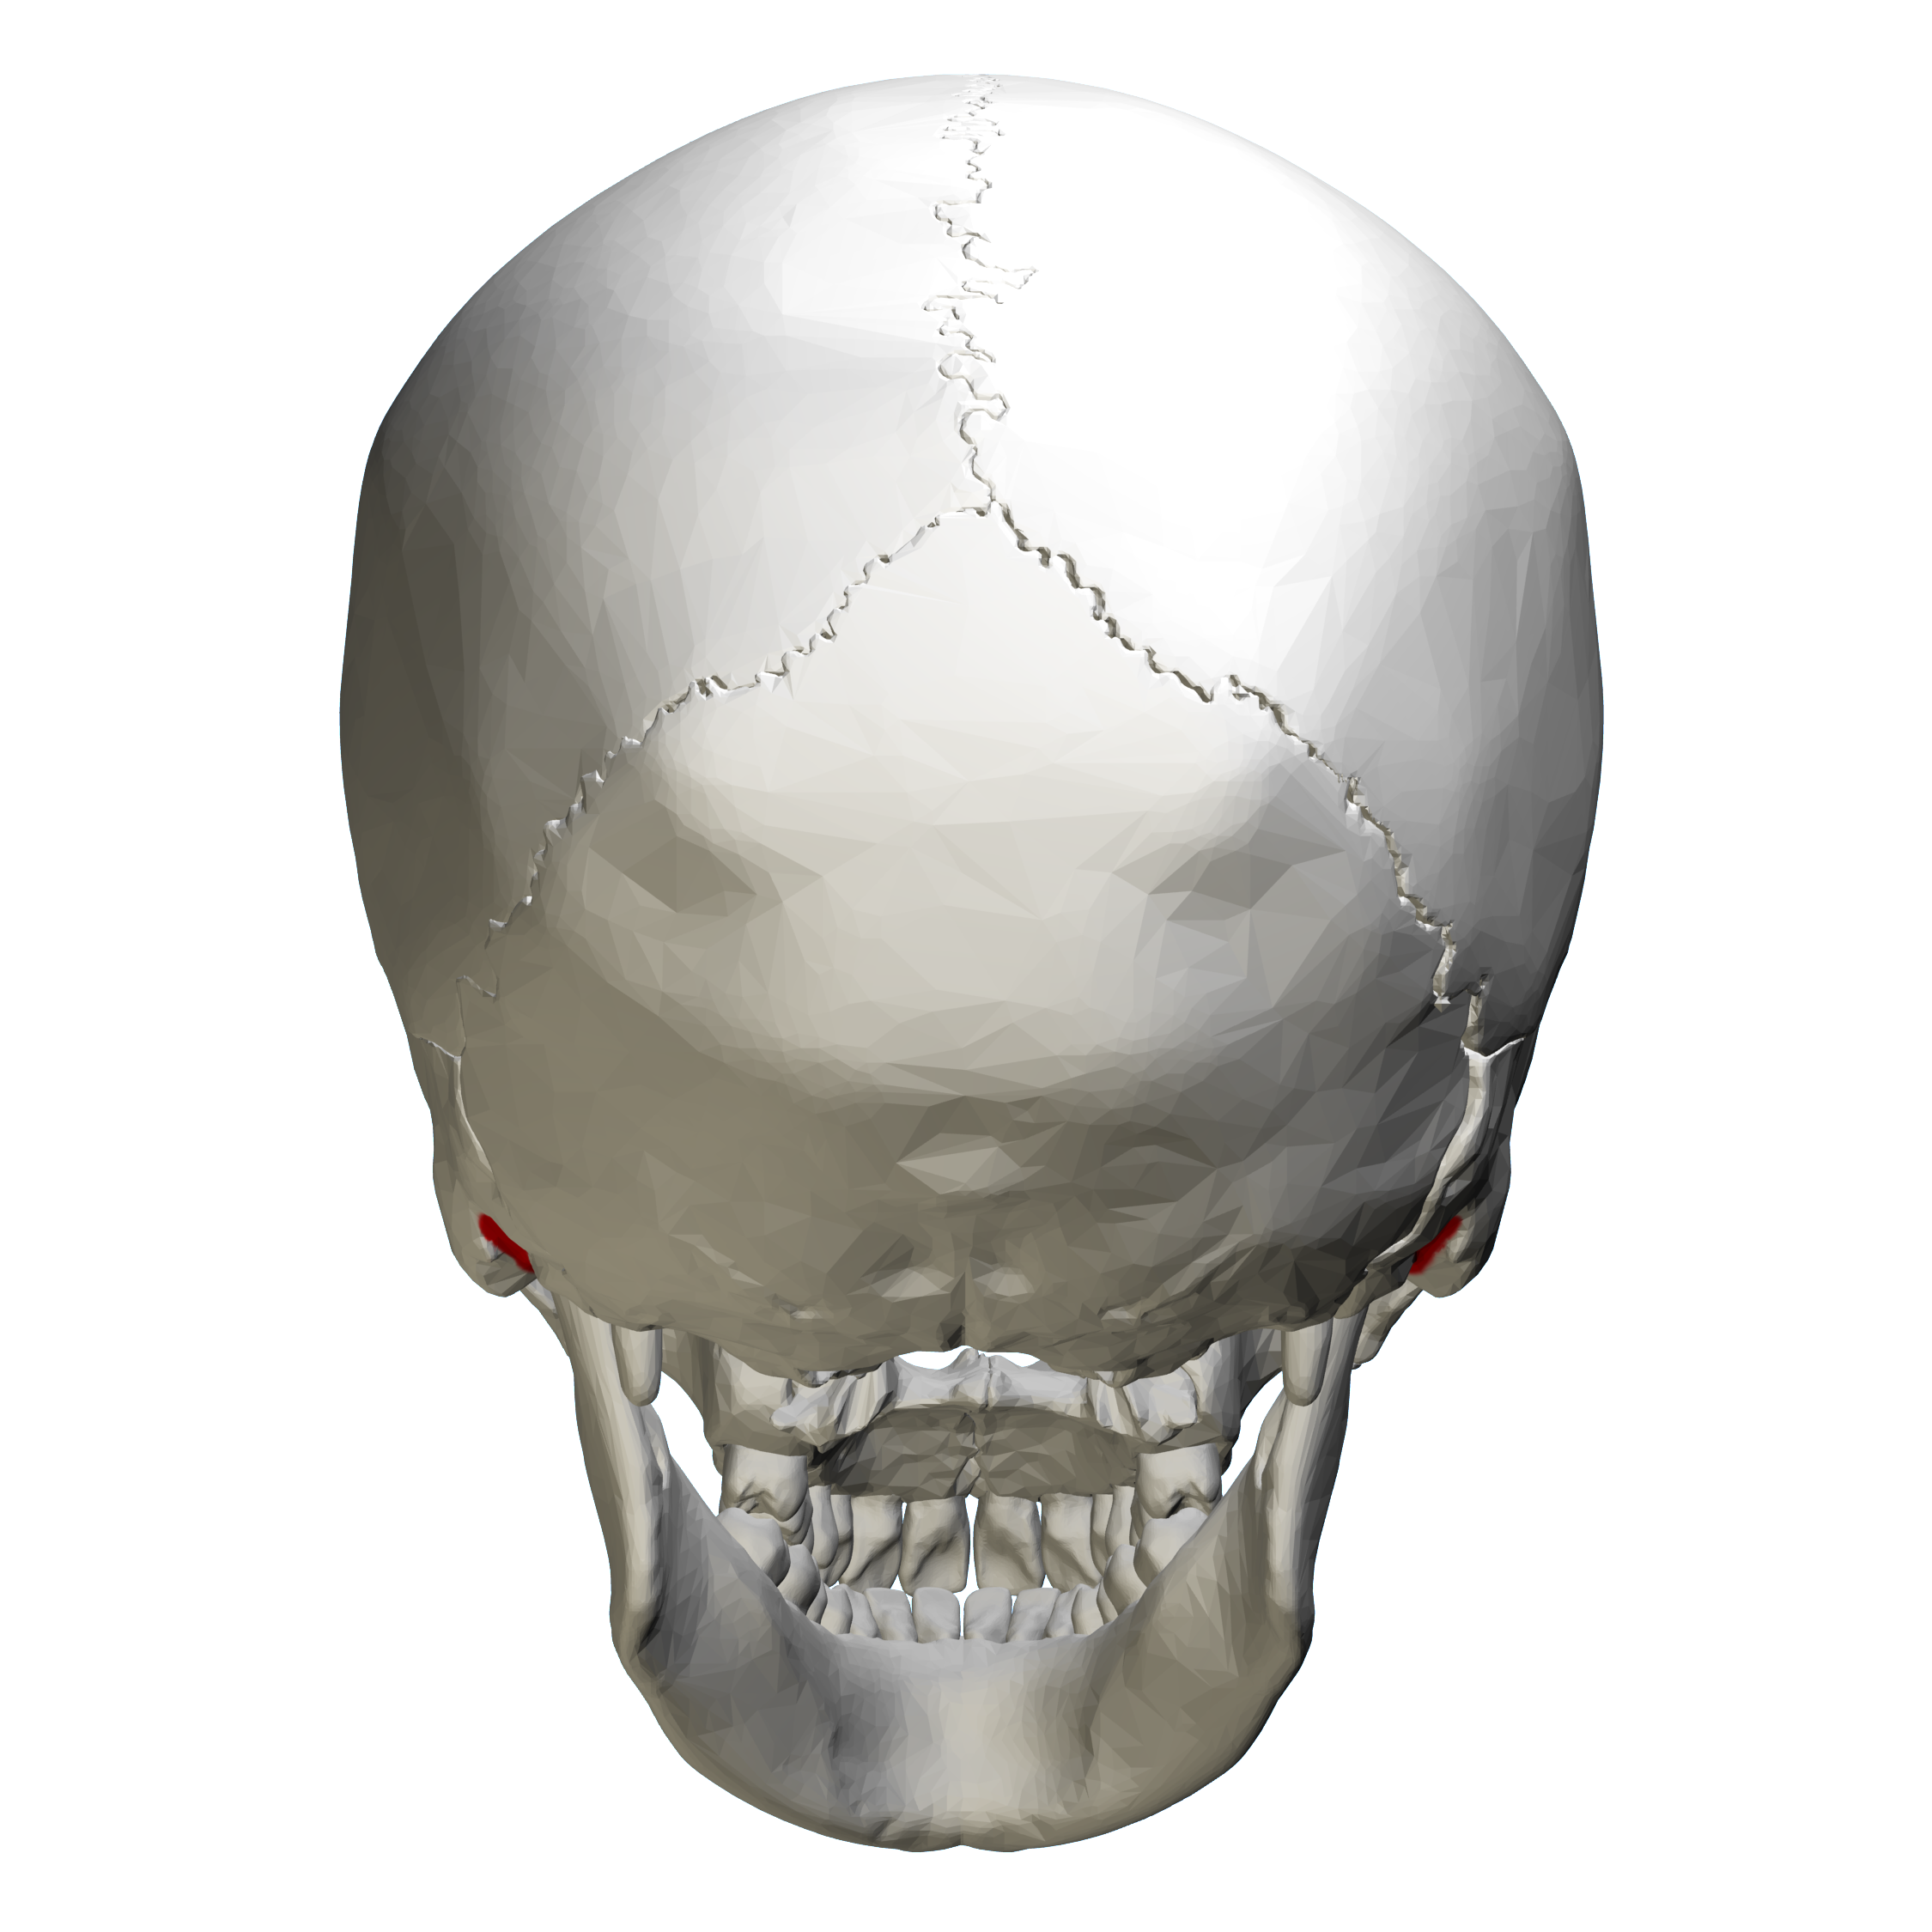 File:Mastoid notch of temporal bone - skull - posterior view.png ...